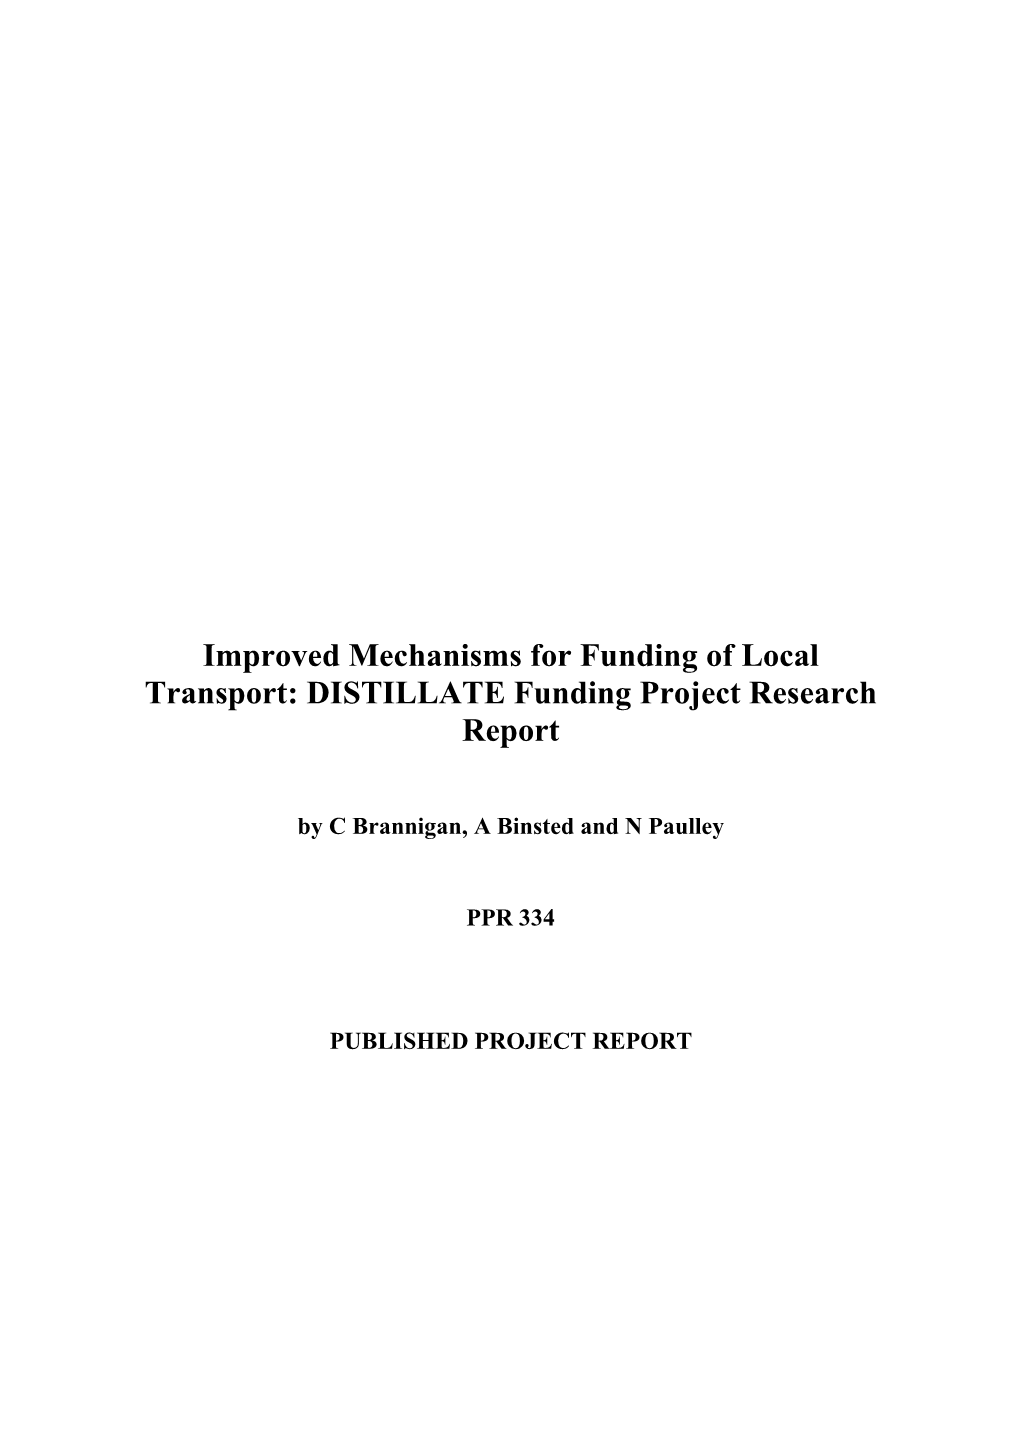 Improved Mechanisms for Funding of Local Transport: DISTILLATE Funding Project Research Report